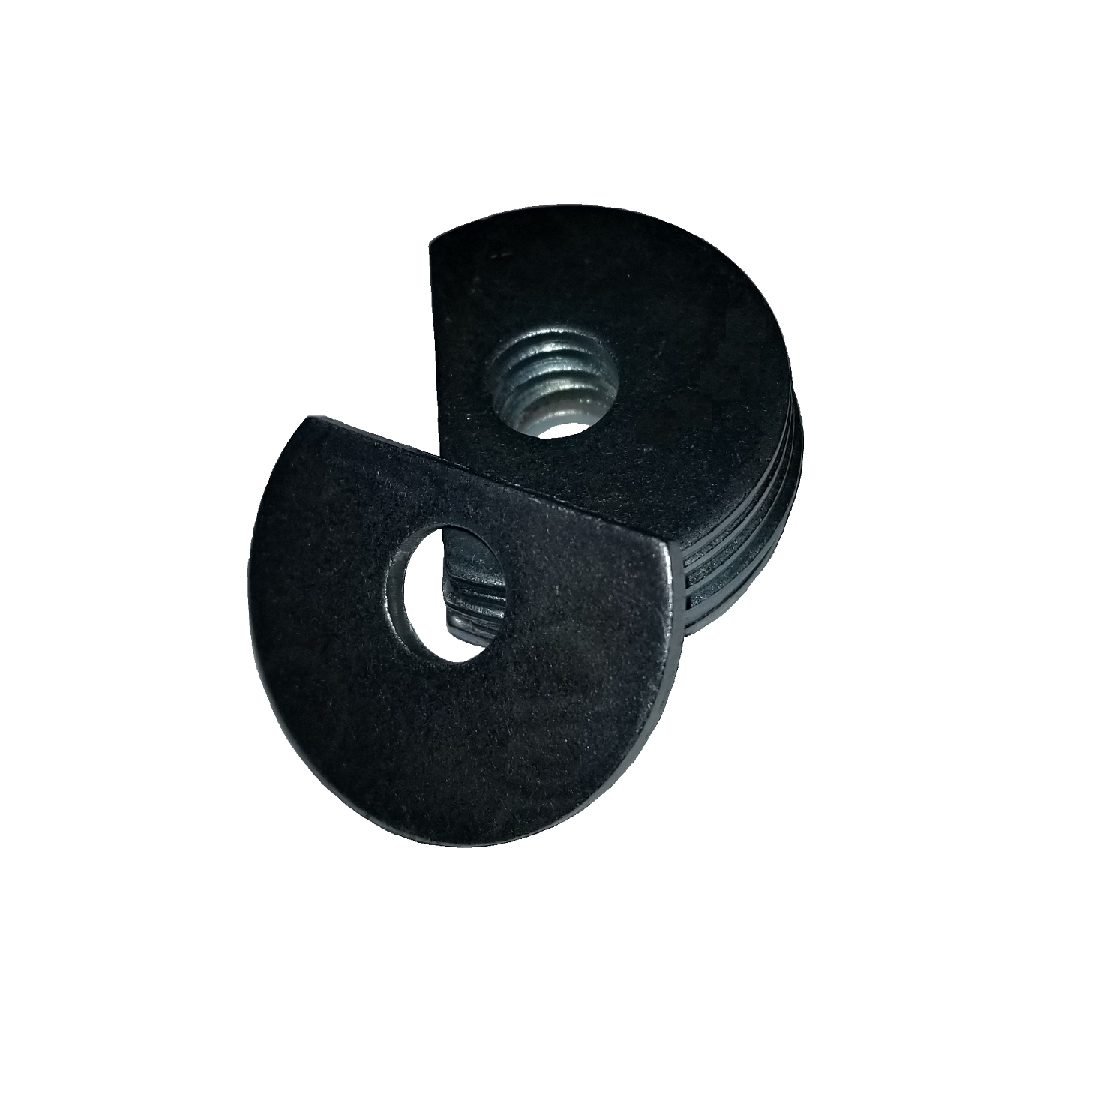 Clipped OD Washer - 0.500 ID, 1.375 OD, 0.120 Thick, Low Carbon Steel - Soft, Zinc & Clear